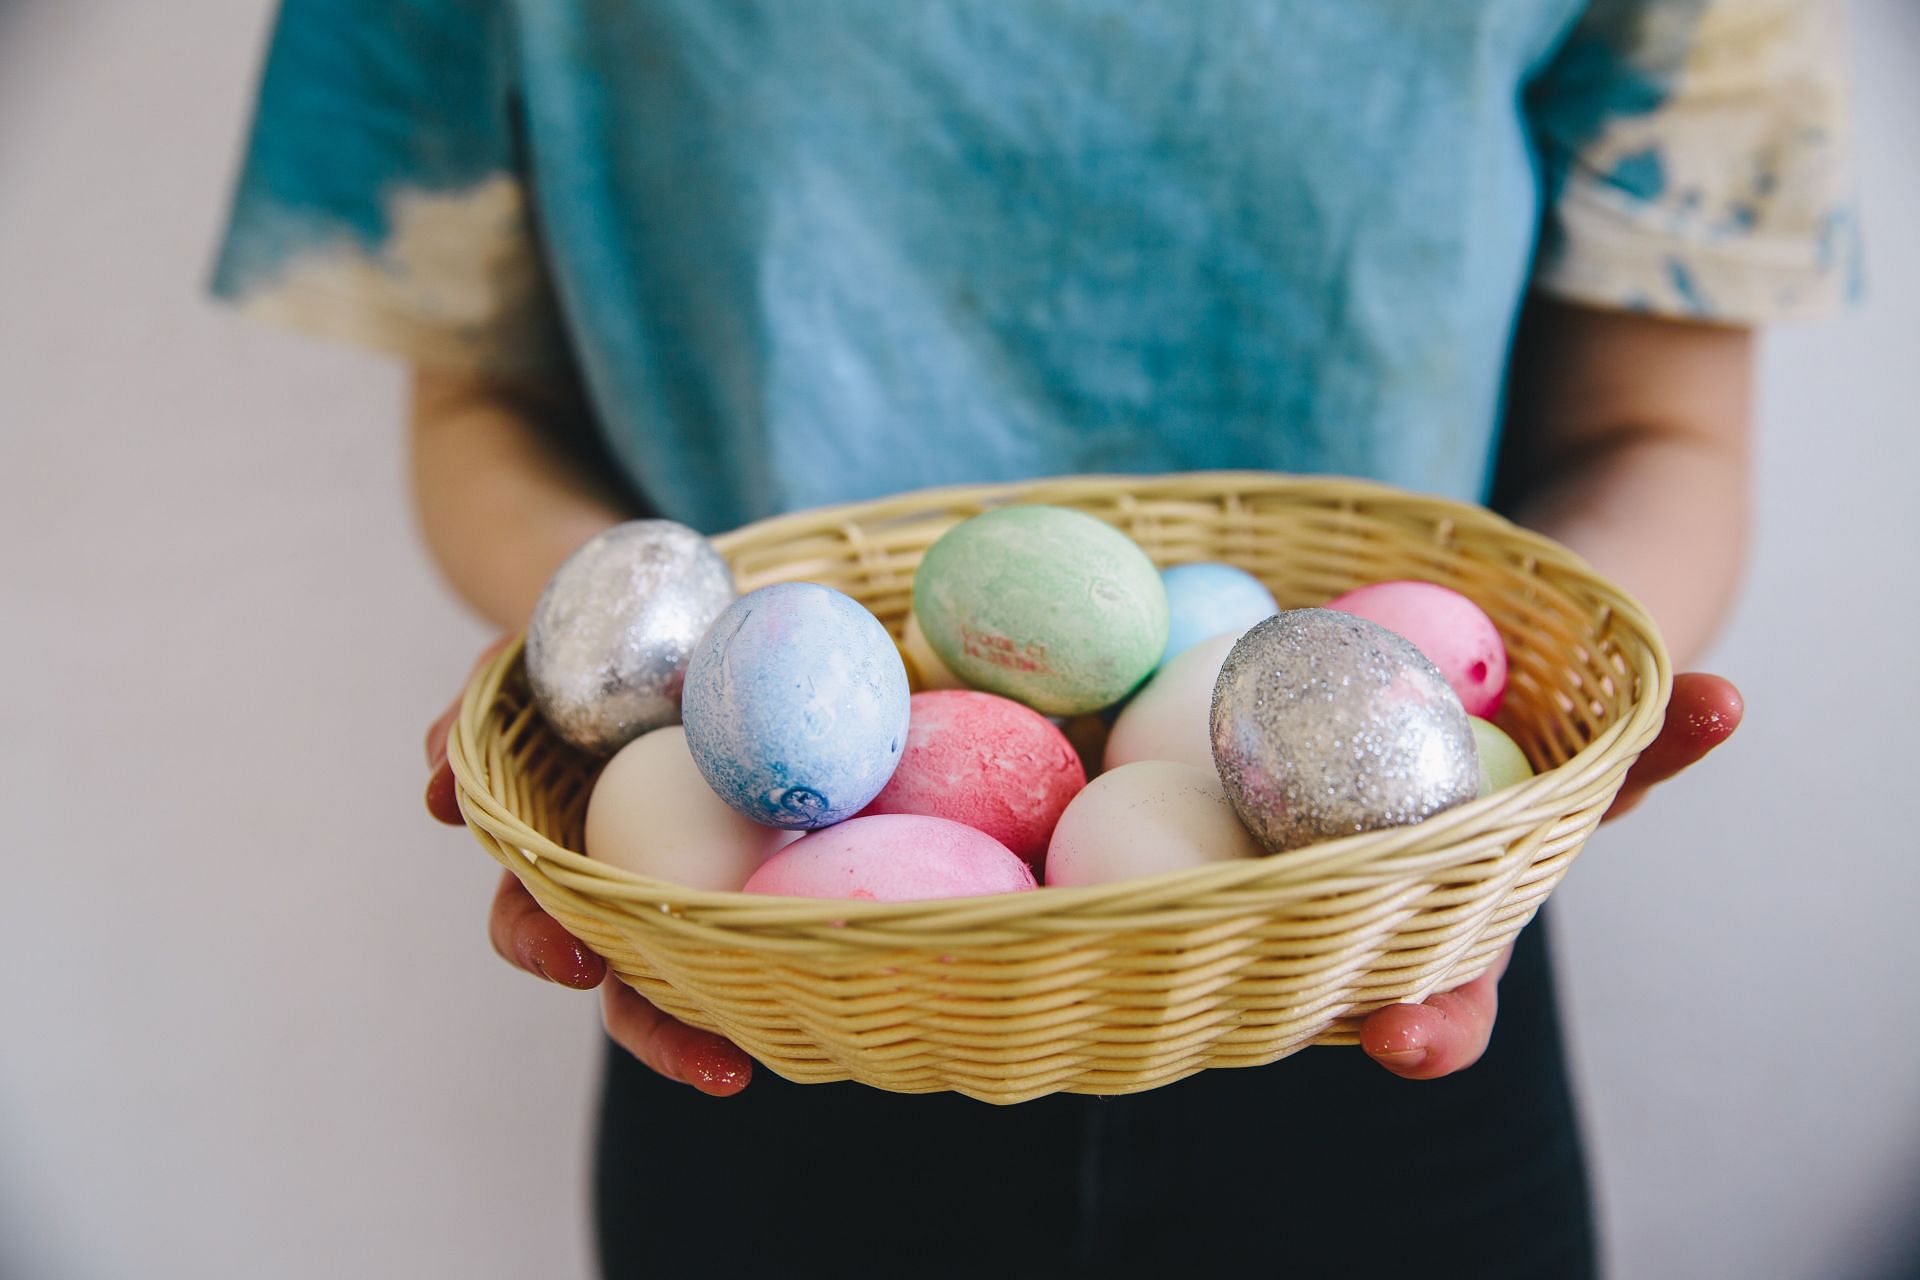 Are dyed Easter eggs safe to eat? (Image via pexels / polina zimmerman)